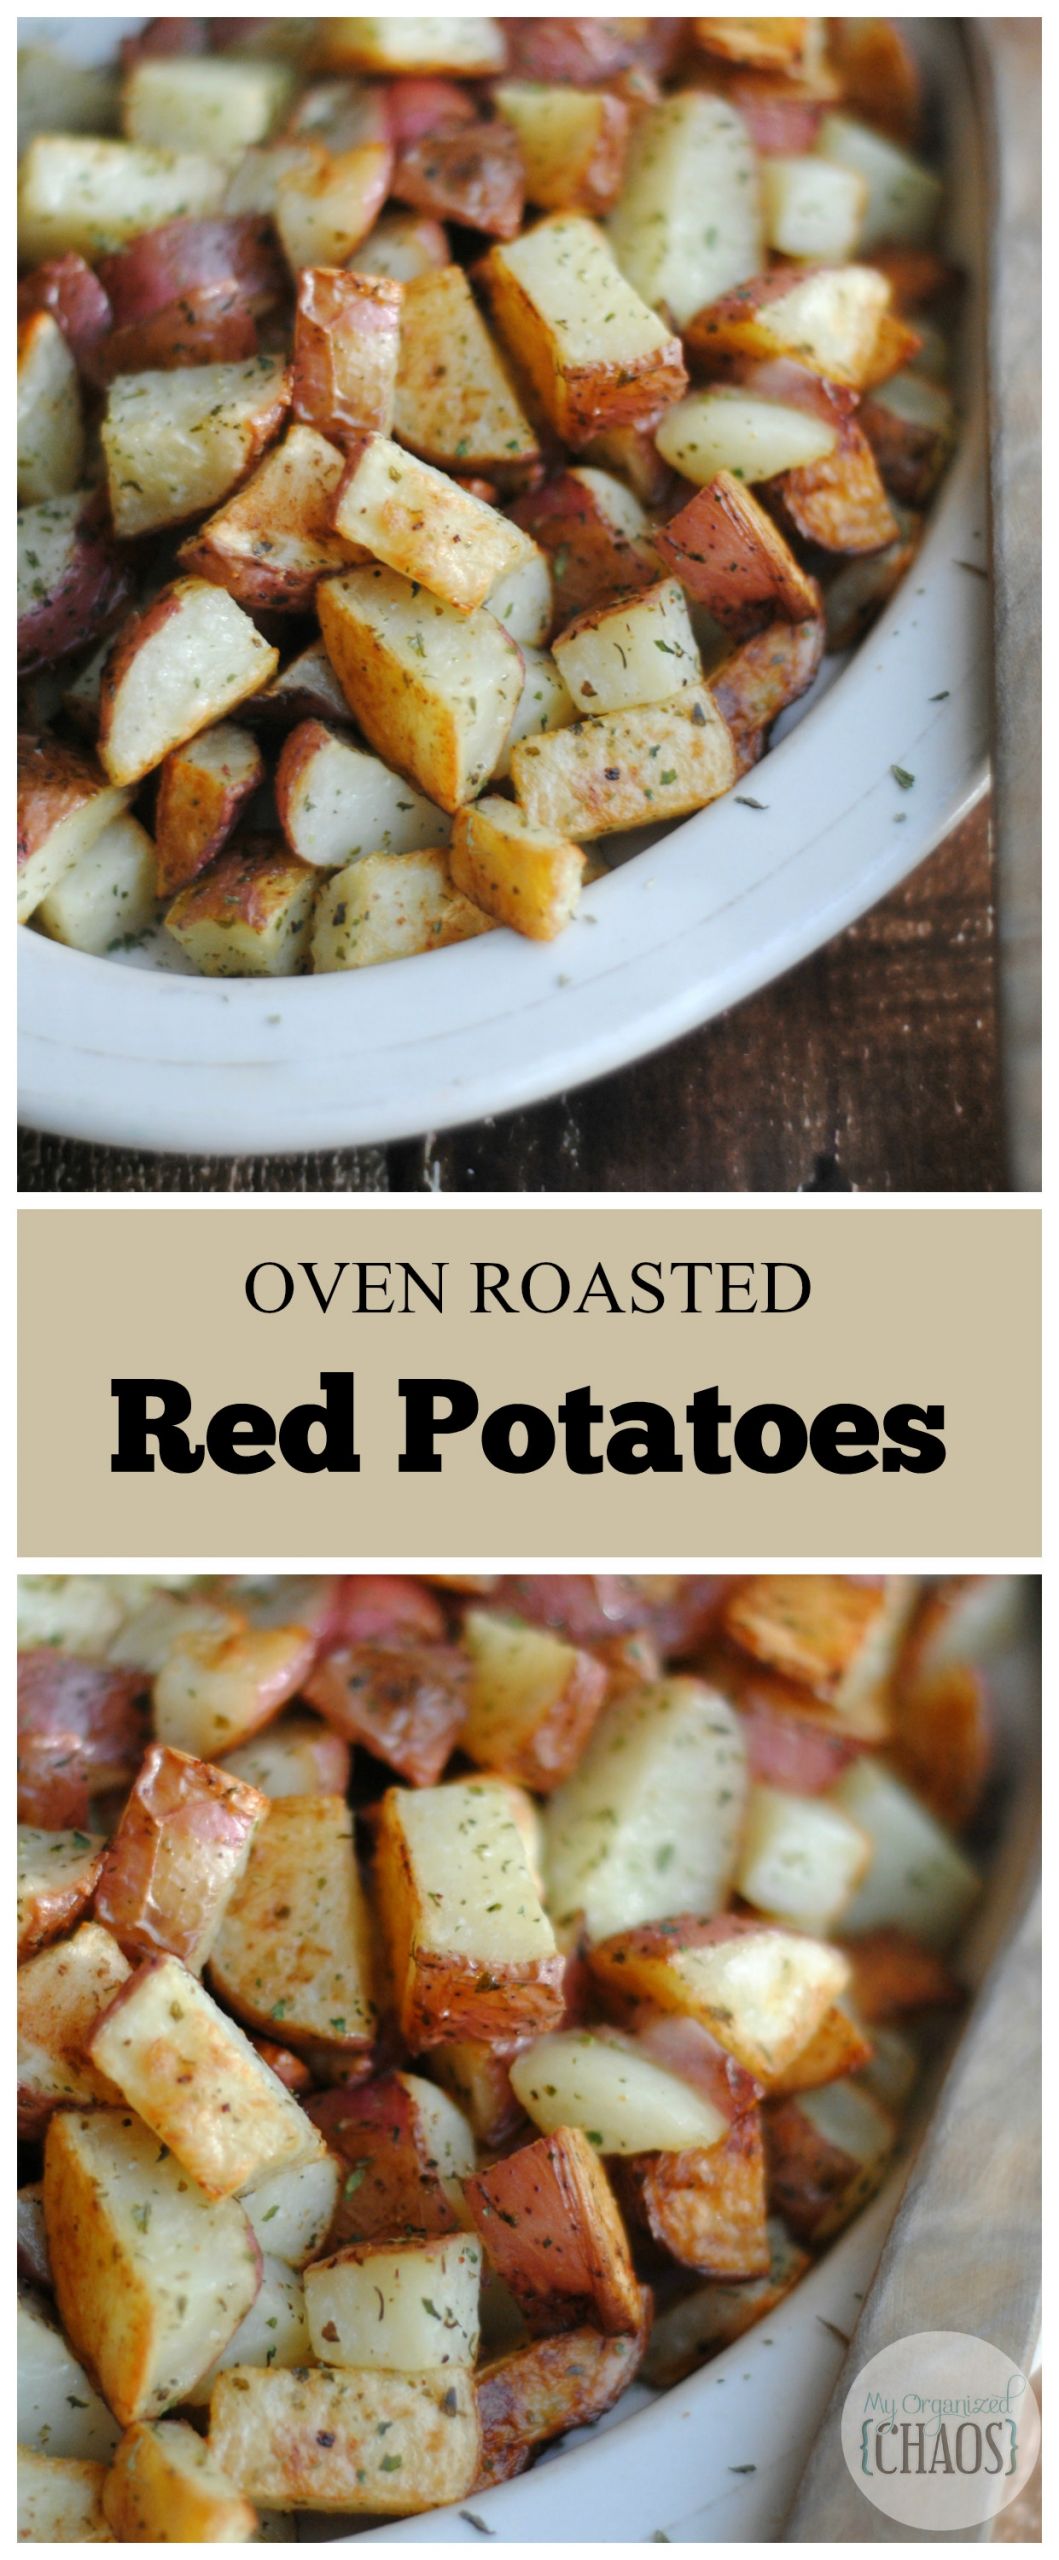 Microwave Red Potato Recipes
 Oven Roasted Red Potatoes